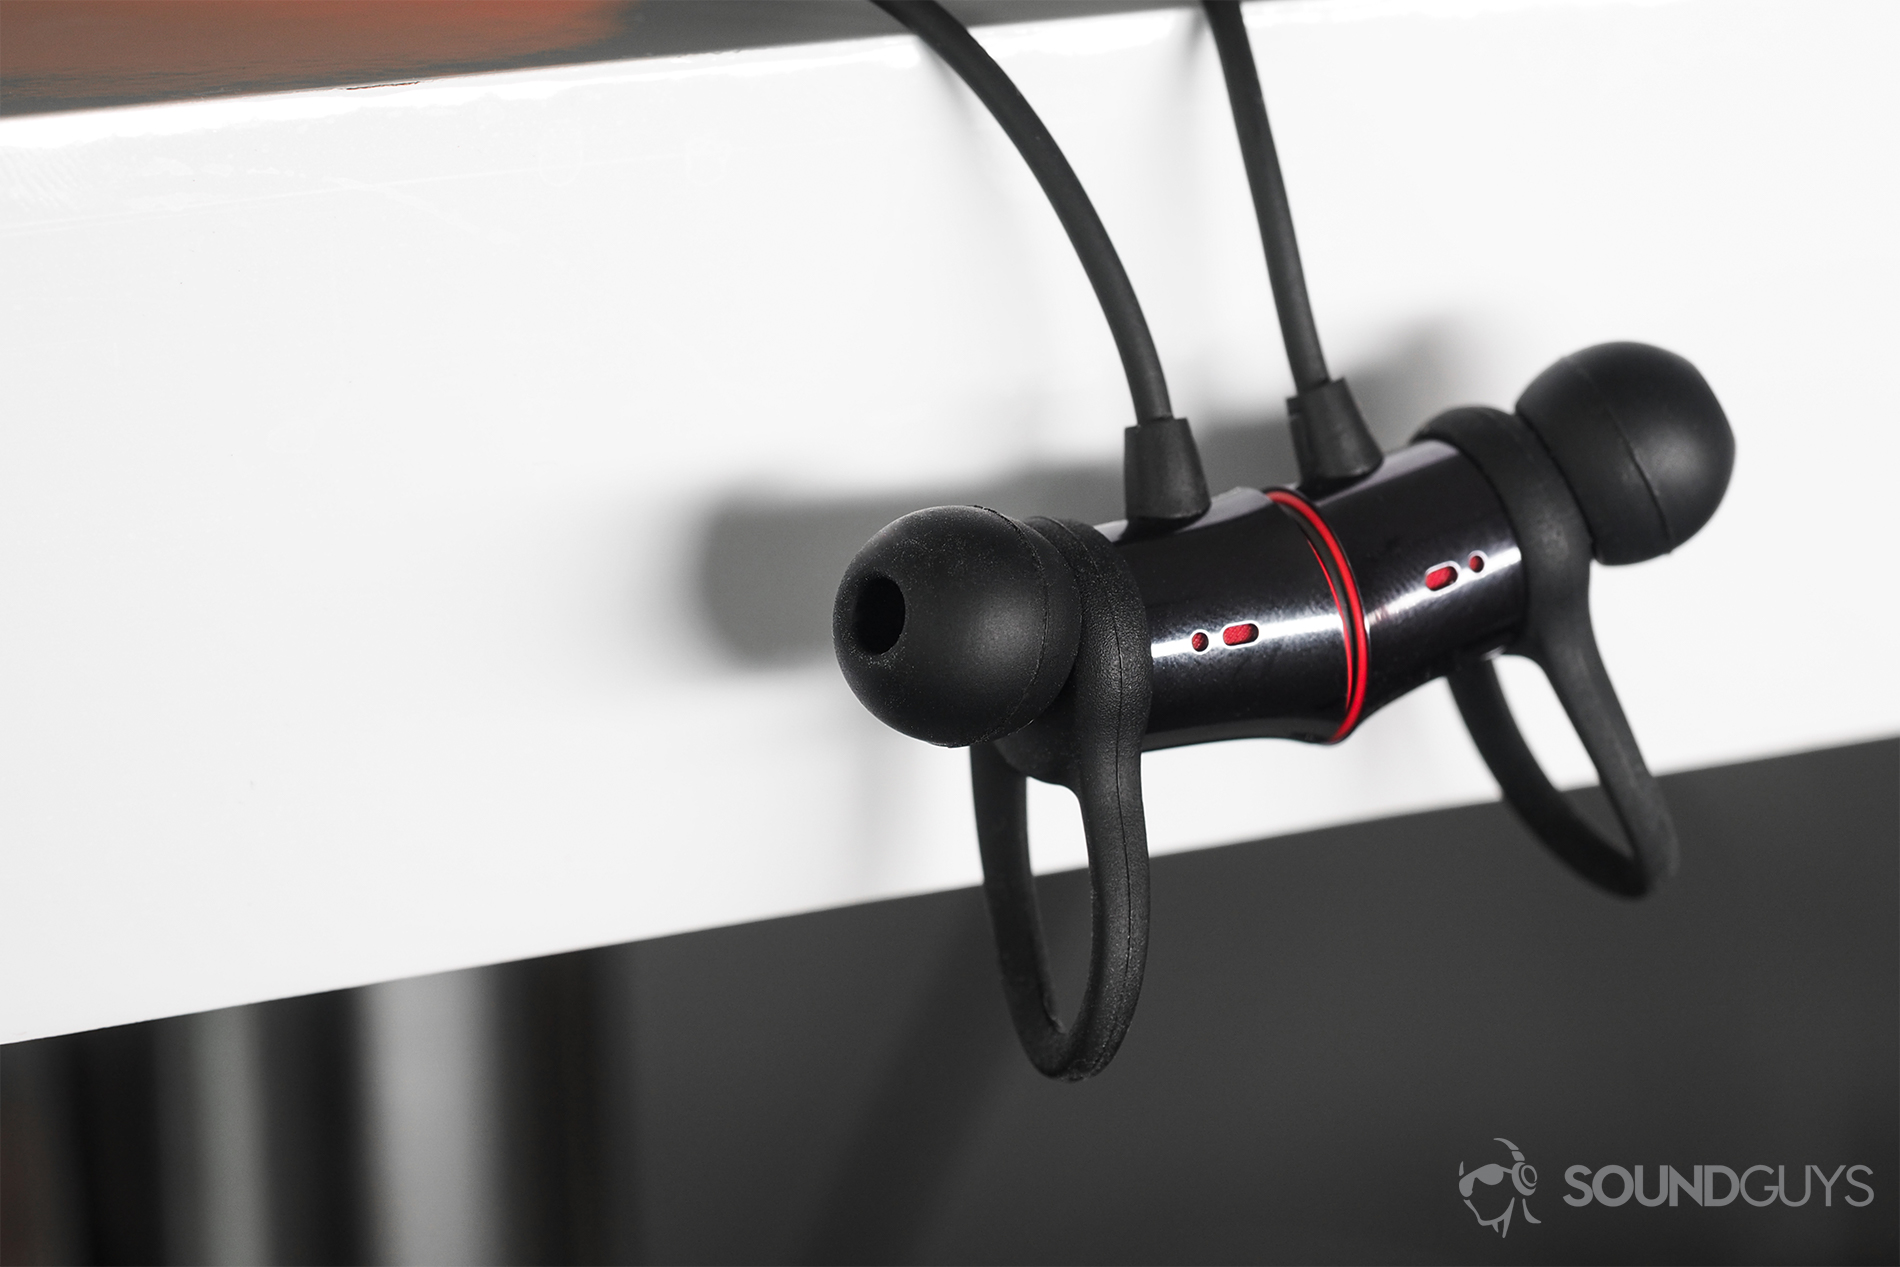 An image of the OnePlus Bullets Wireless earbud housings magnetized together.